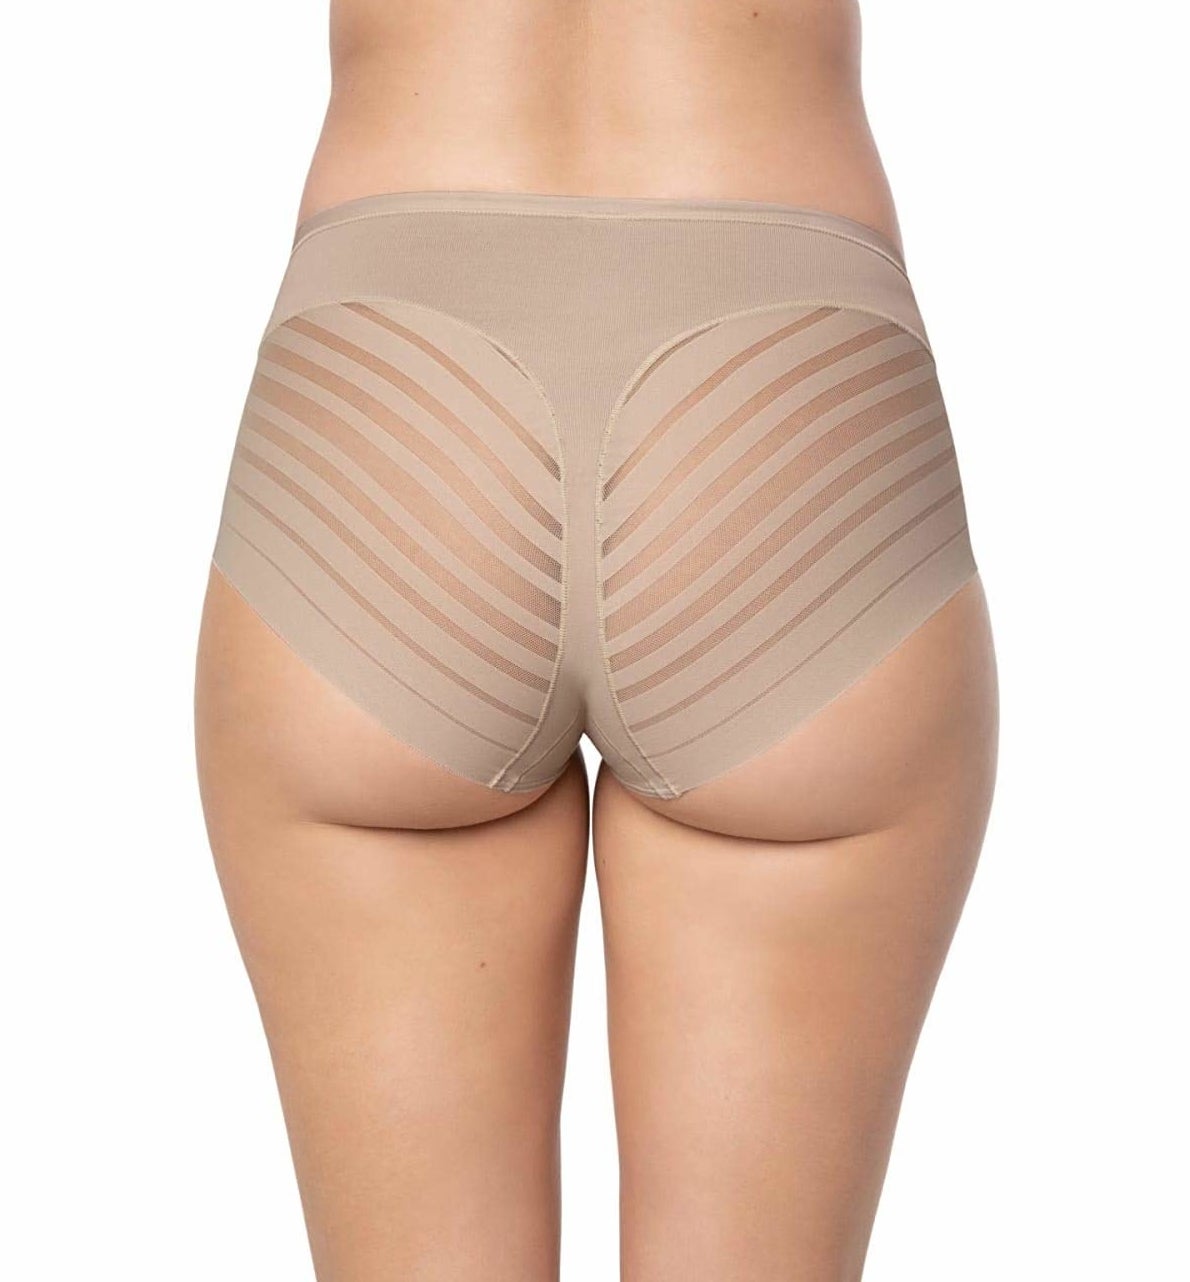 They've now brought out stick-on knickers for women who hate panty lines –  but they look eye-wateringly uncomfortable